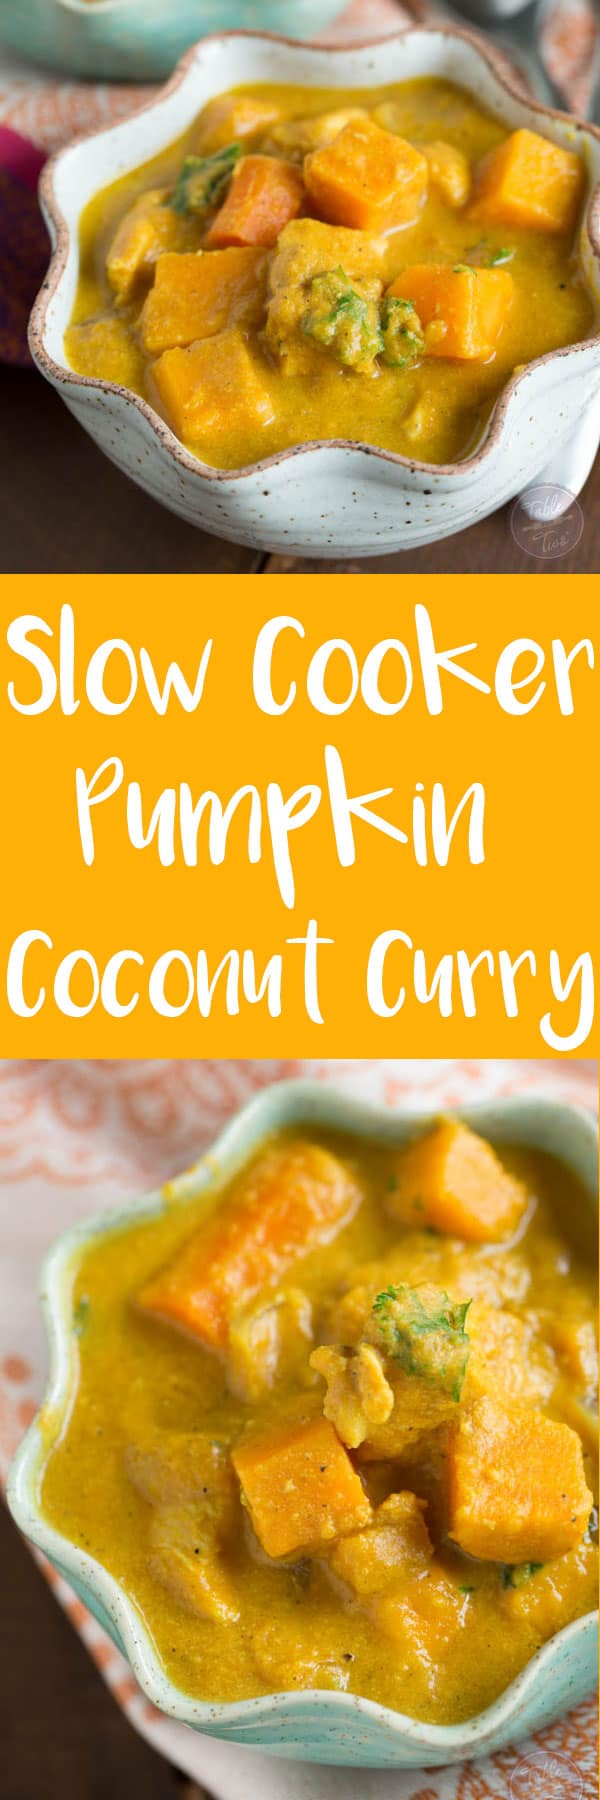 The BEST slow cooker dish you'll have this season! If you love the flavors of Indian cuisine, this is a KEEPER!